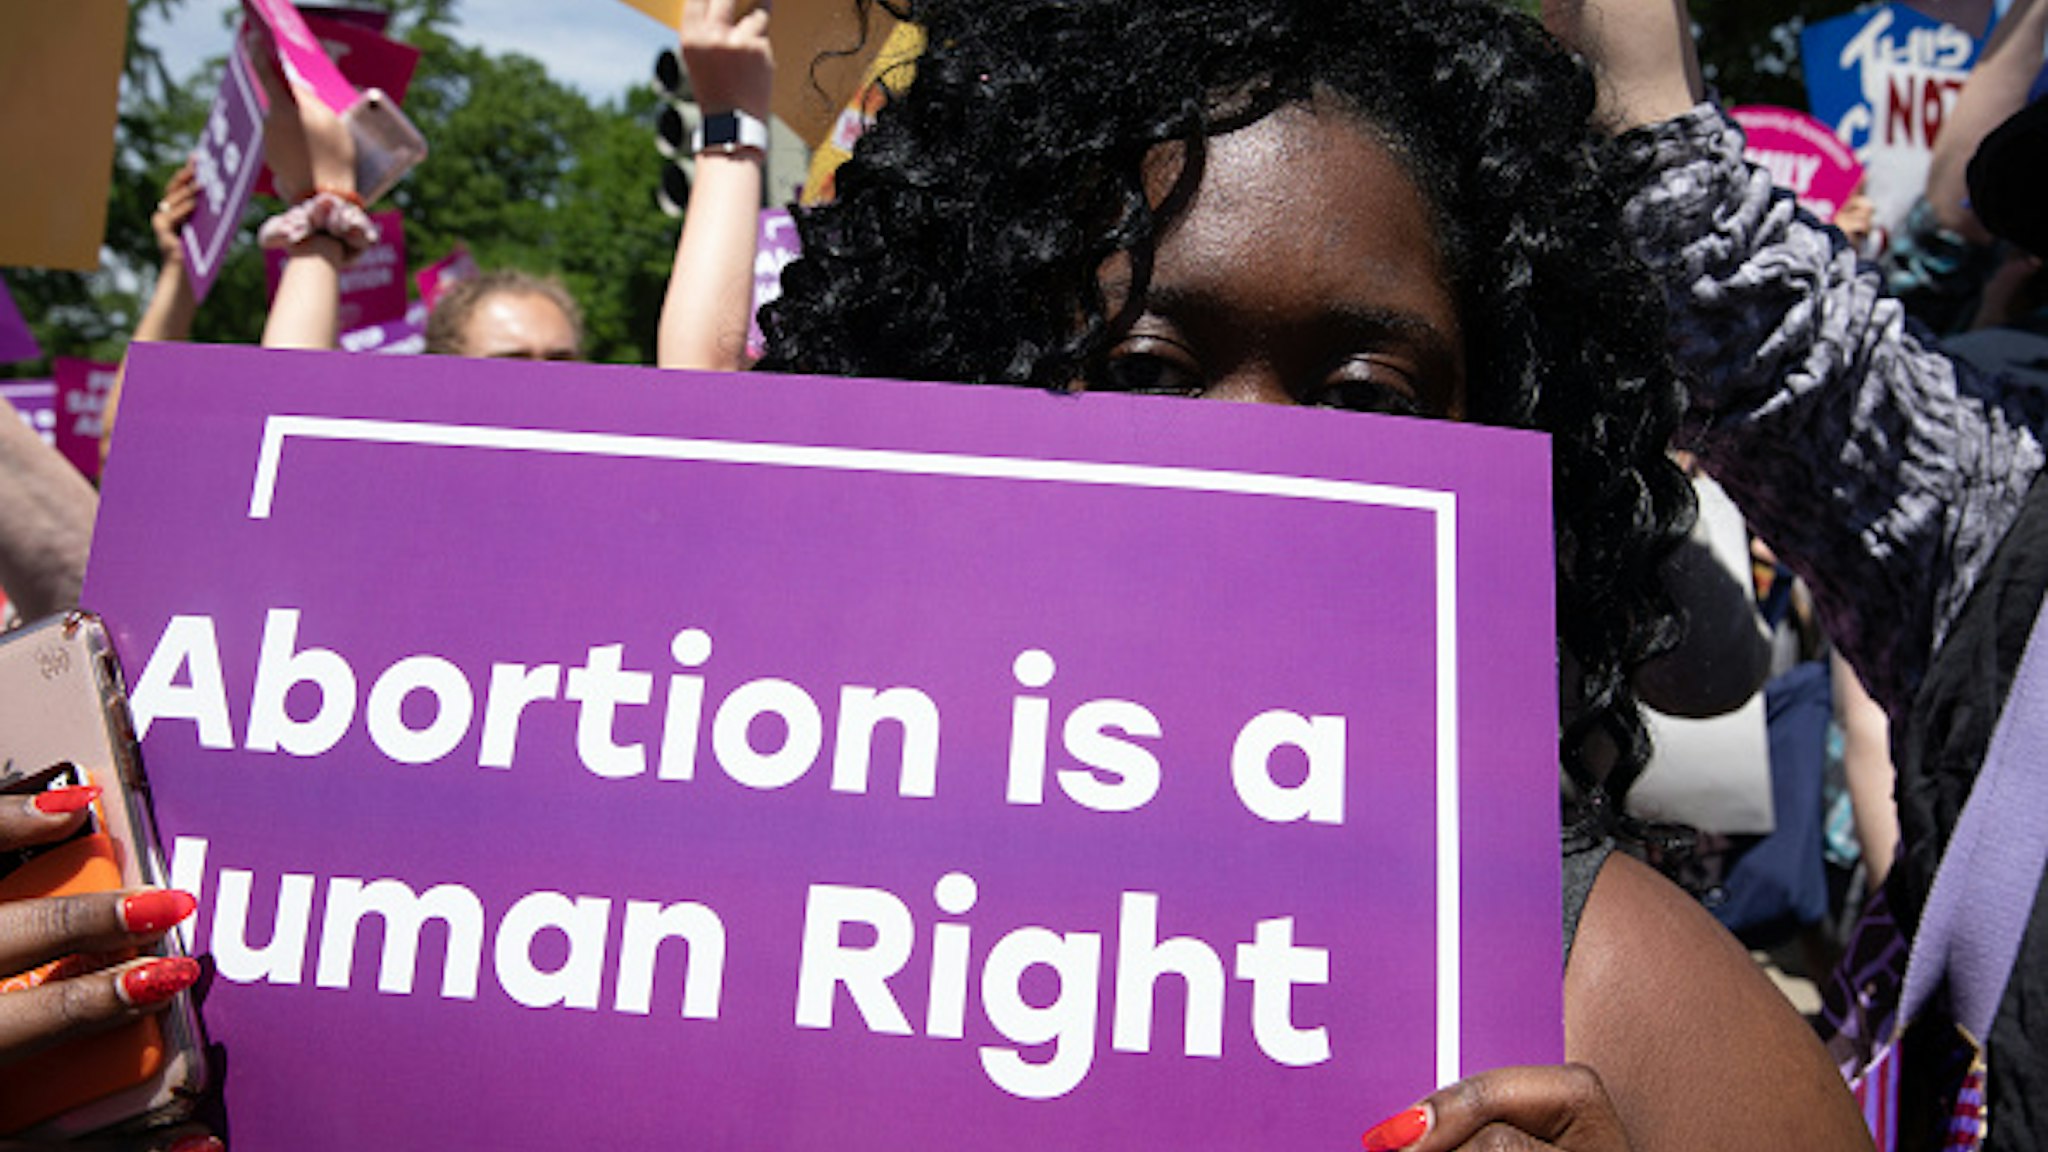 Abortionrights activist gathered outside the U.S. Supreme Court to protest against the recent abortion laws passed across the country in recent weeks. Tuesday, May 21, 2019.